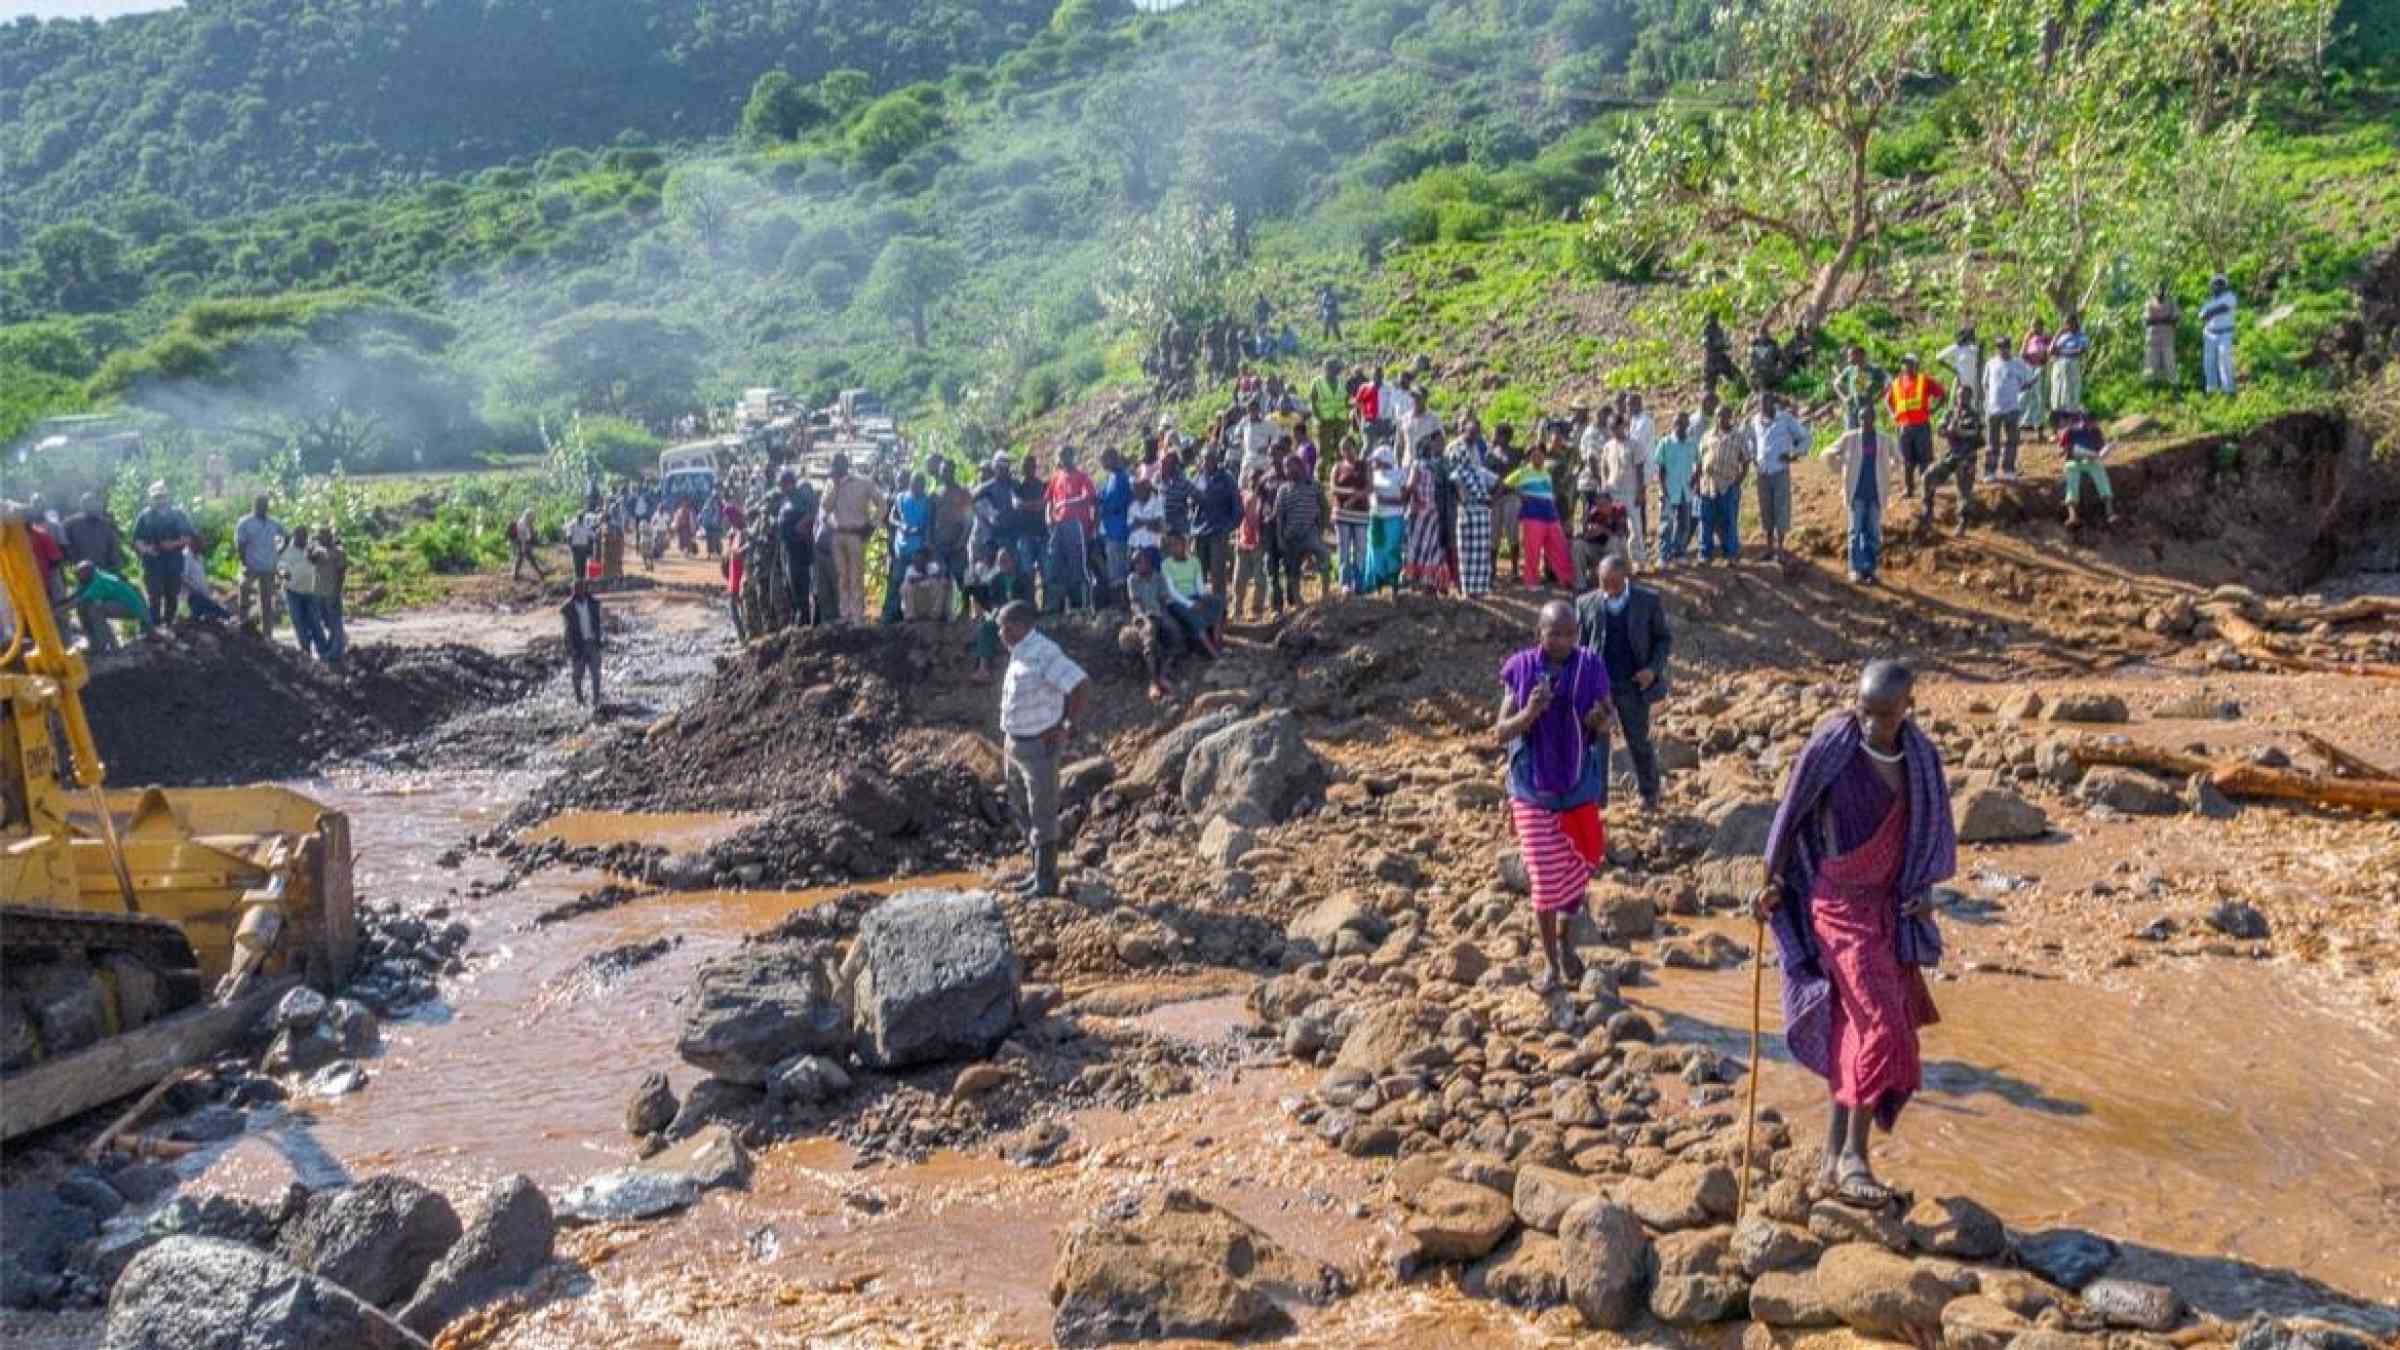 People cross a stone path across a road destroyed by mudflow in Manyara, Tanzania